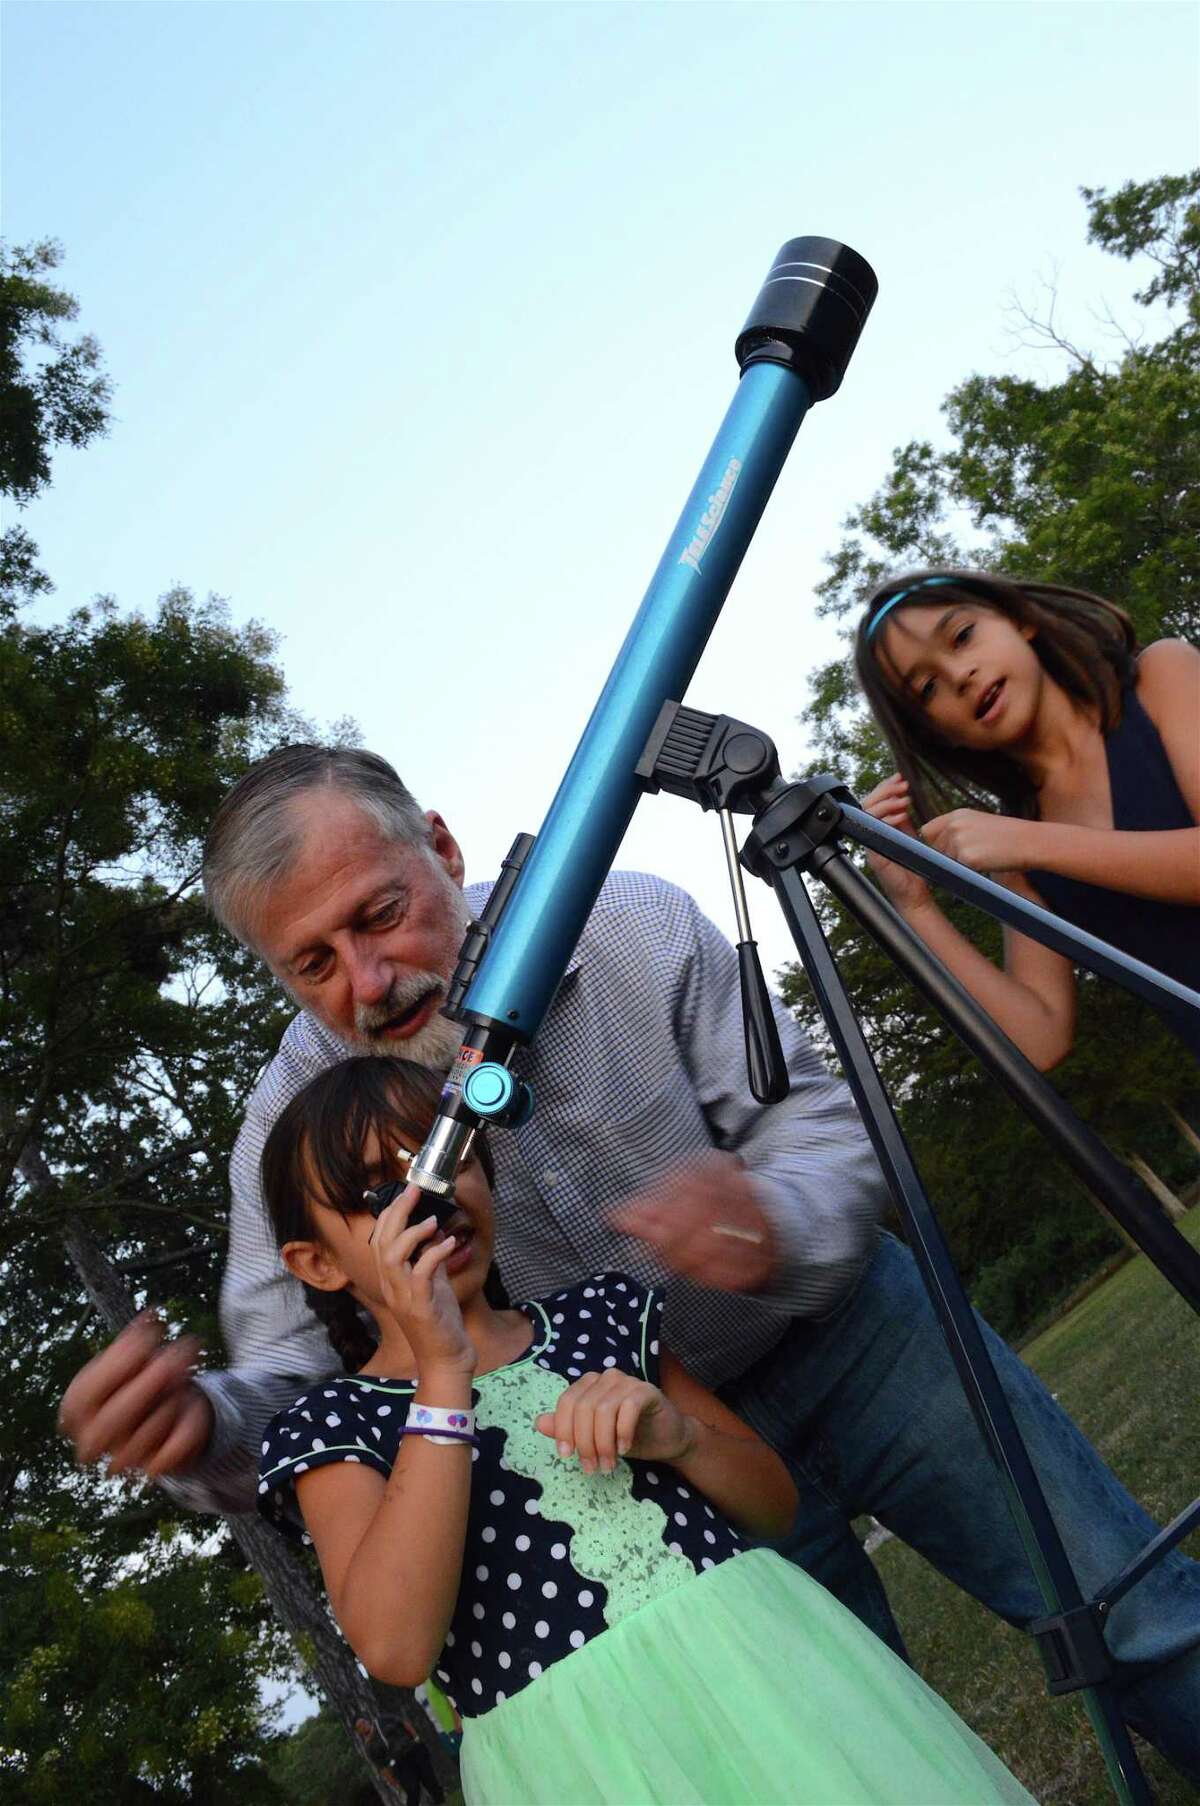 Mark Dam of Darien helps his granddaughter, Maya Dam, 6, of Westport, look at the moon through his telescope, as her sister Emma, 9, looks on at the Recreation Department's last Waveny Concert of the season, Wednesday, Aug. 30, 2017, at Waveny Park in New Canaan, Conn.